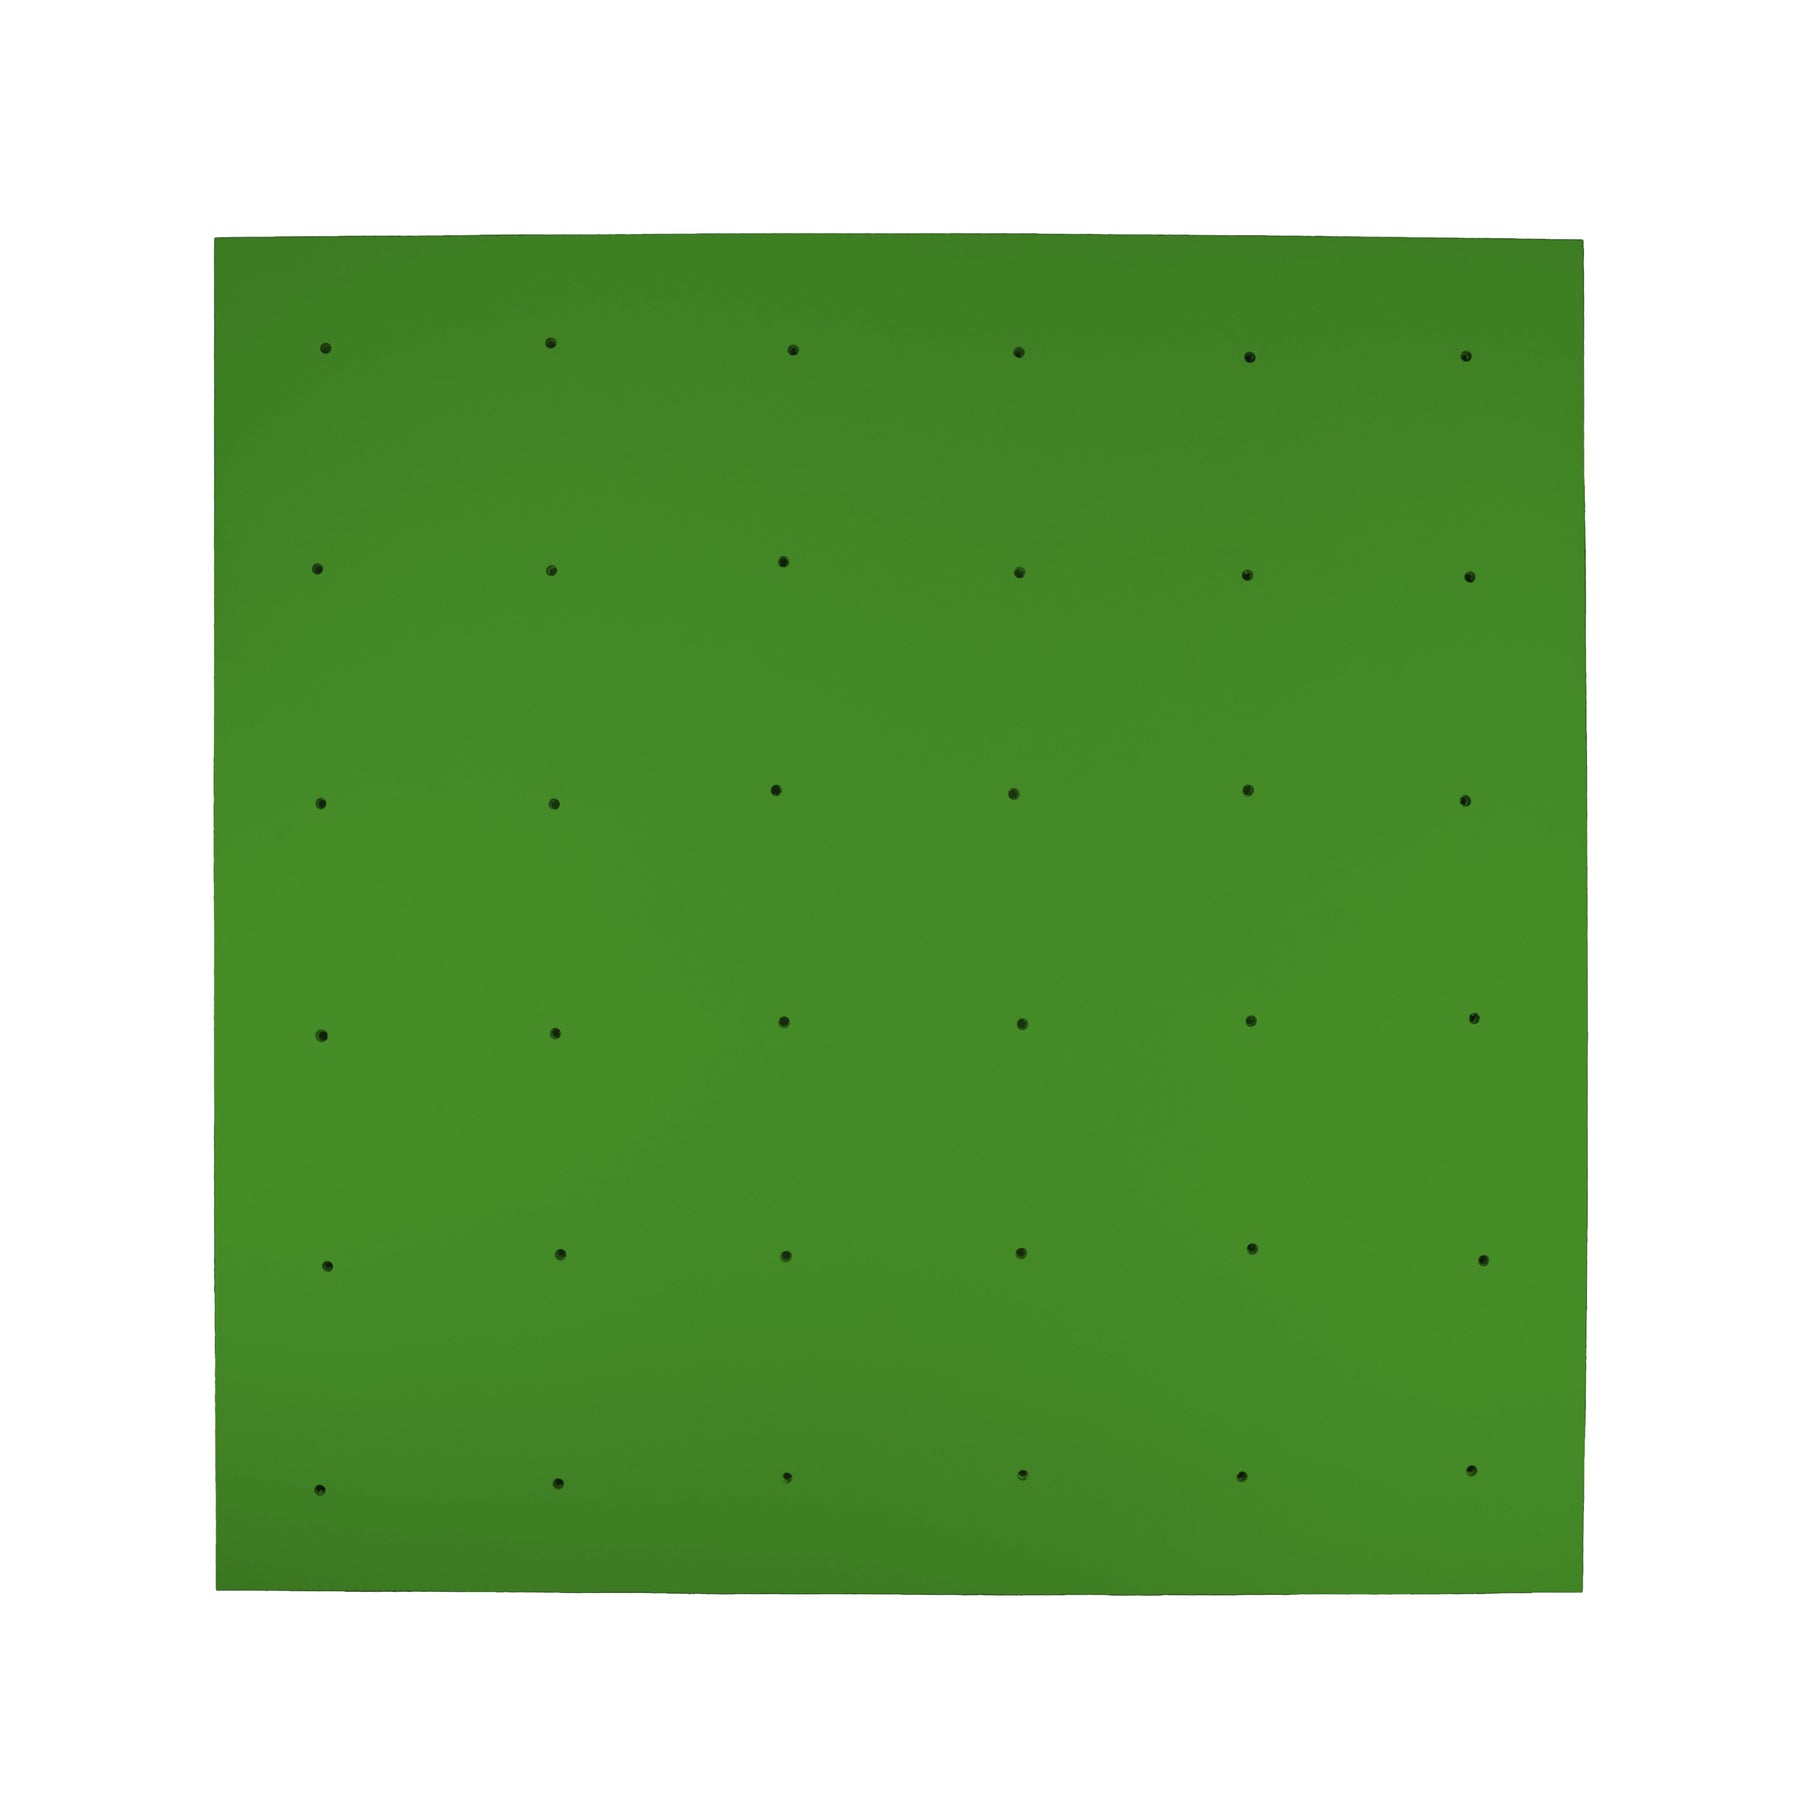 Square Rock Wall Panel - FLAT FRAME